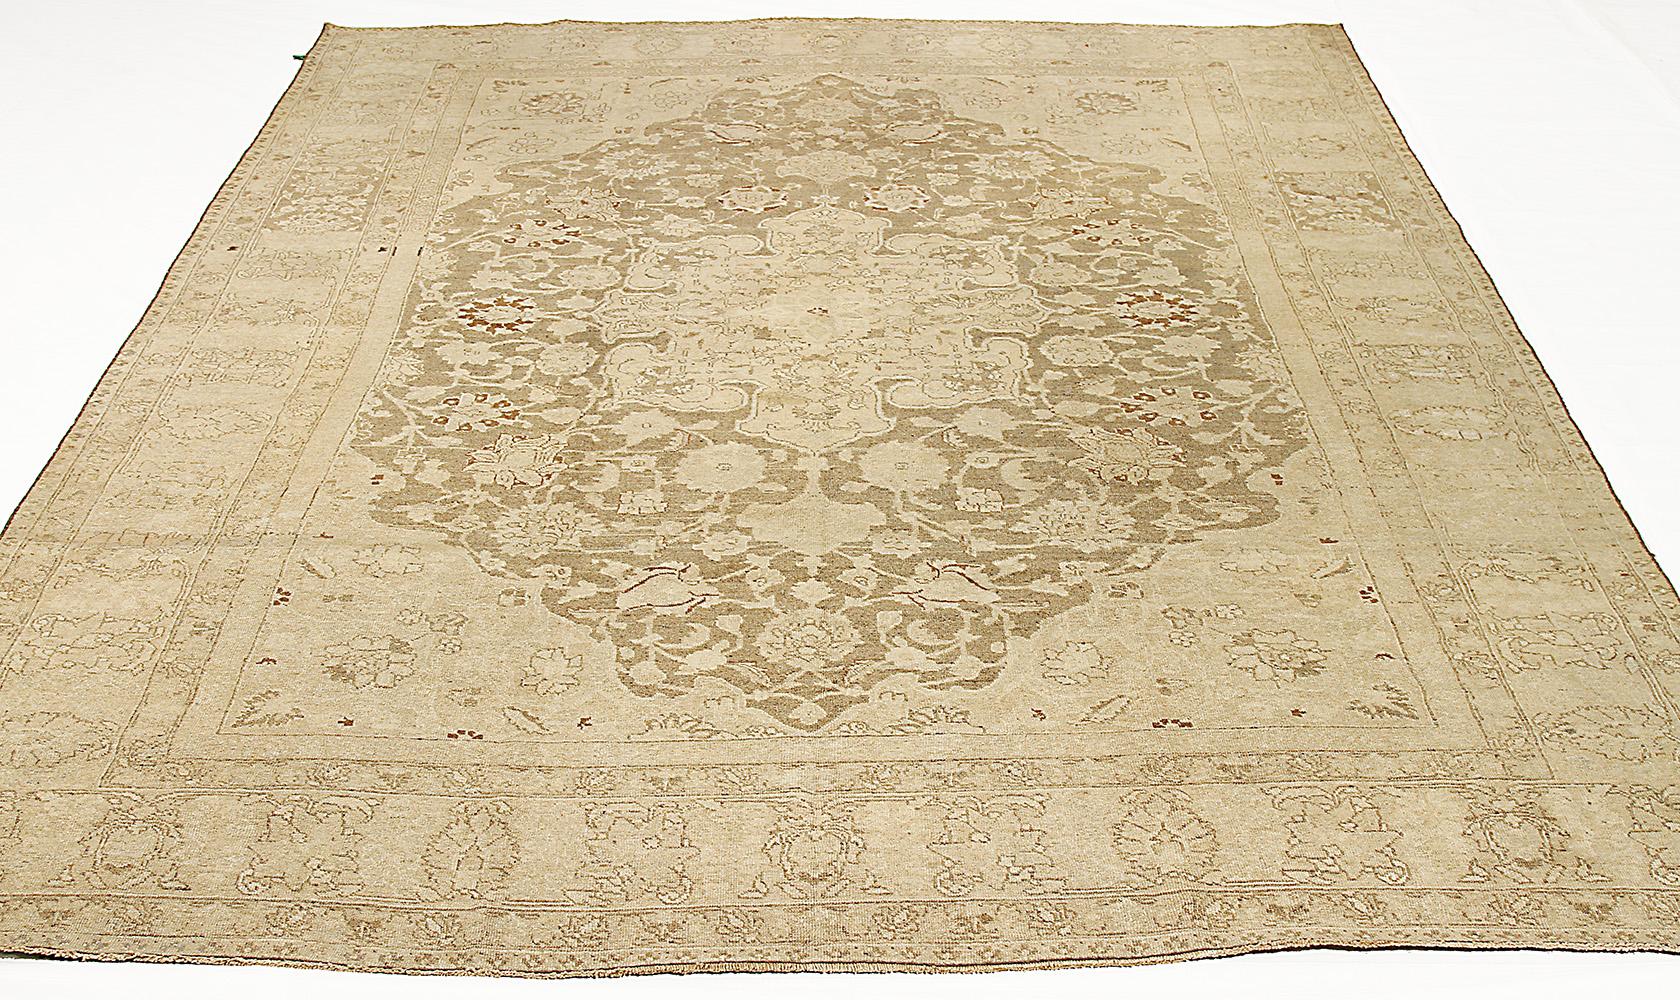 Antique Persian rug handwoven from the finest sheep’s wool and colored with all-natural vegetable dyes that are safe for humans and pets. It’s a traditional Tabriz weaving featuring a large floral medallion in beige with shades of brown over an